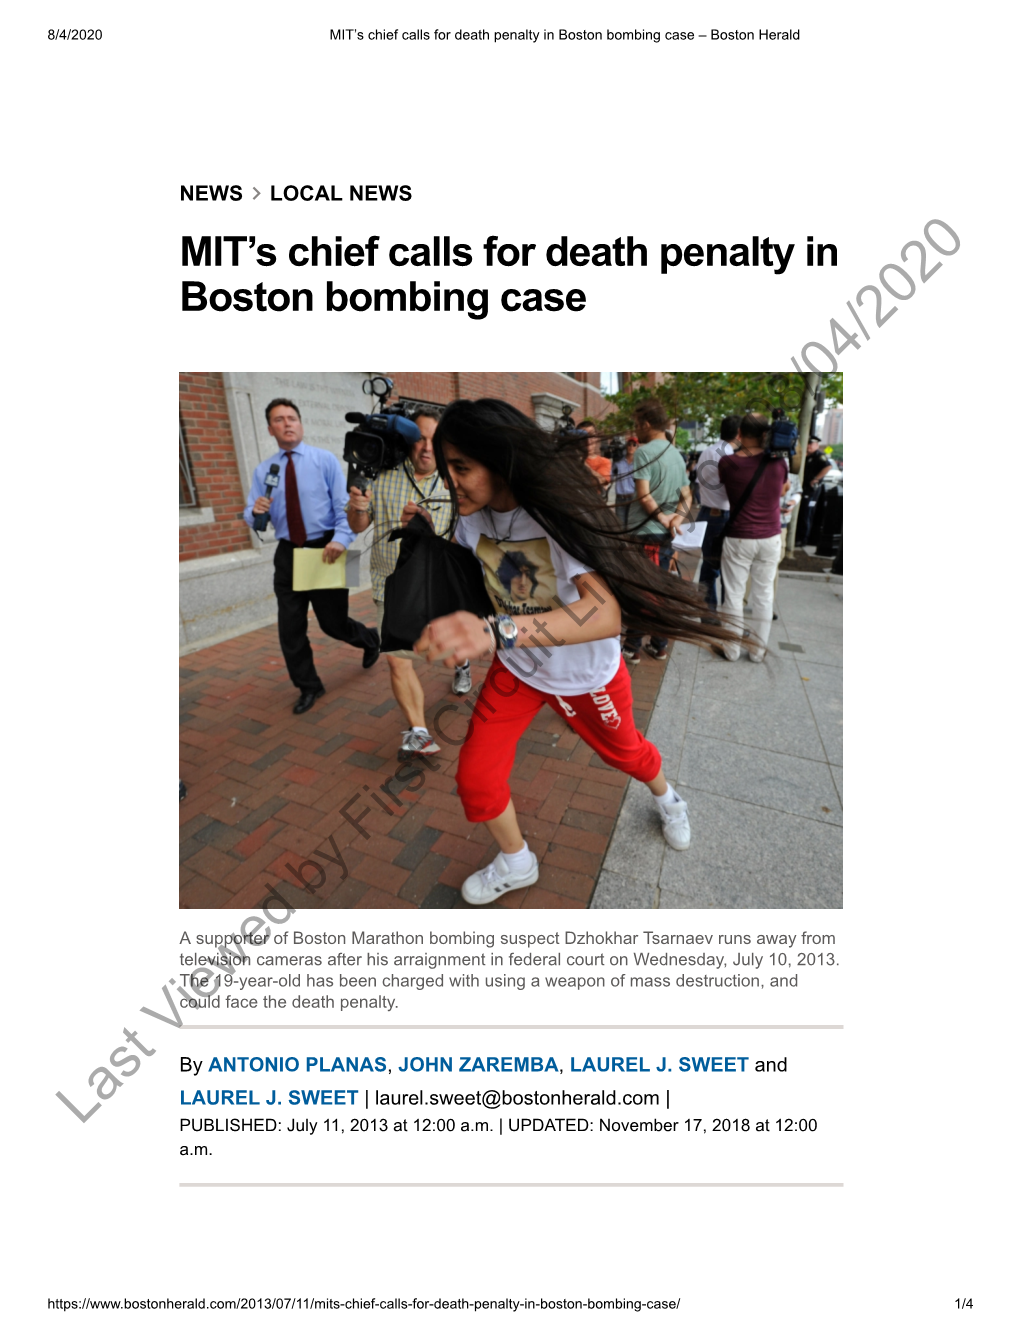 MIT's Chief Calls for Death Penalty in Boston Bombing Case